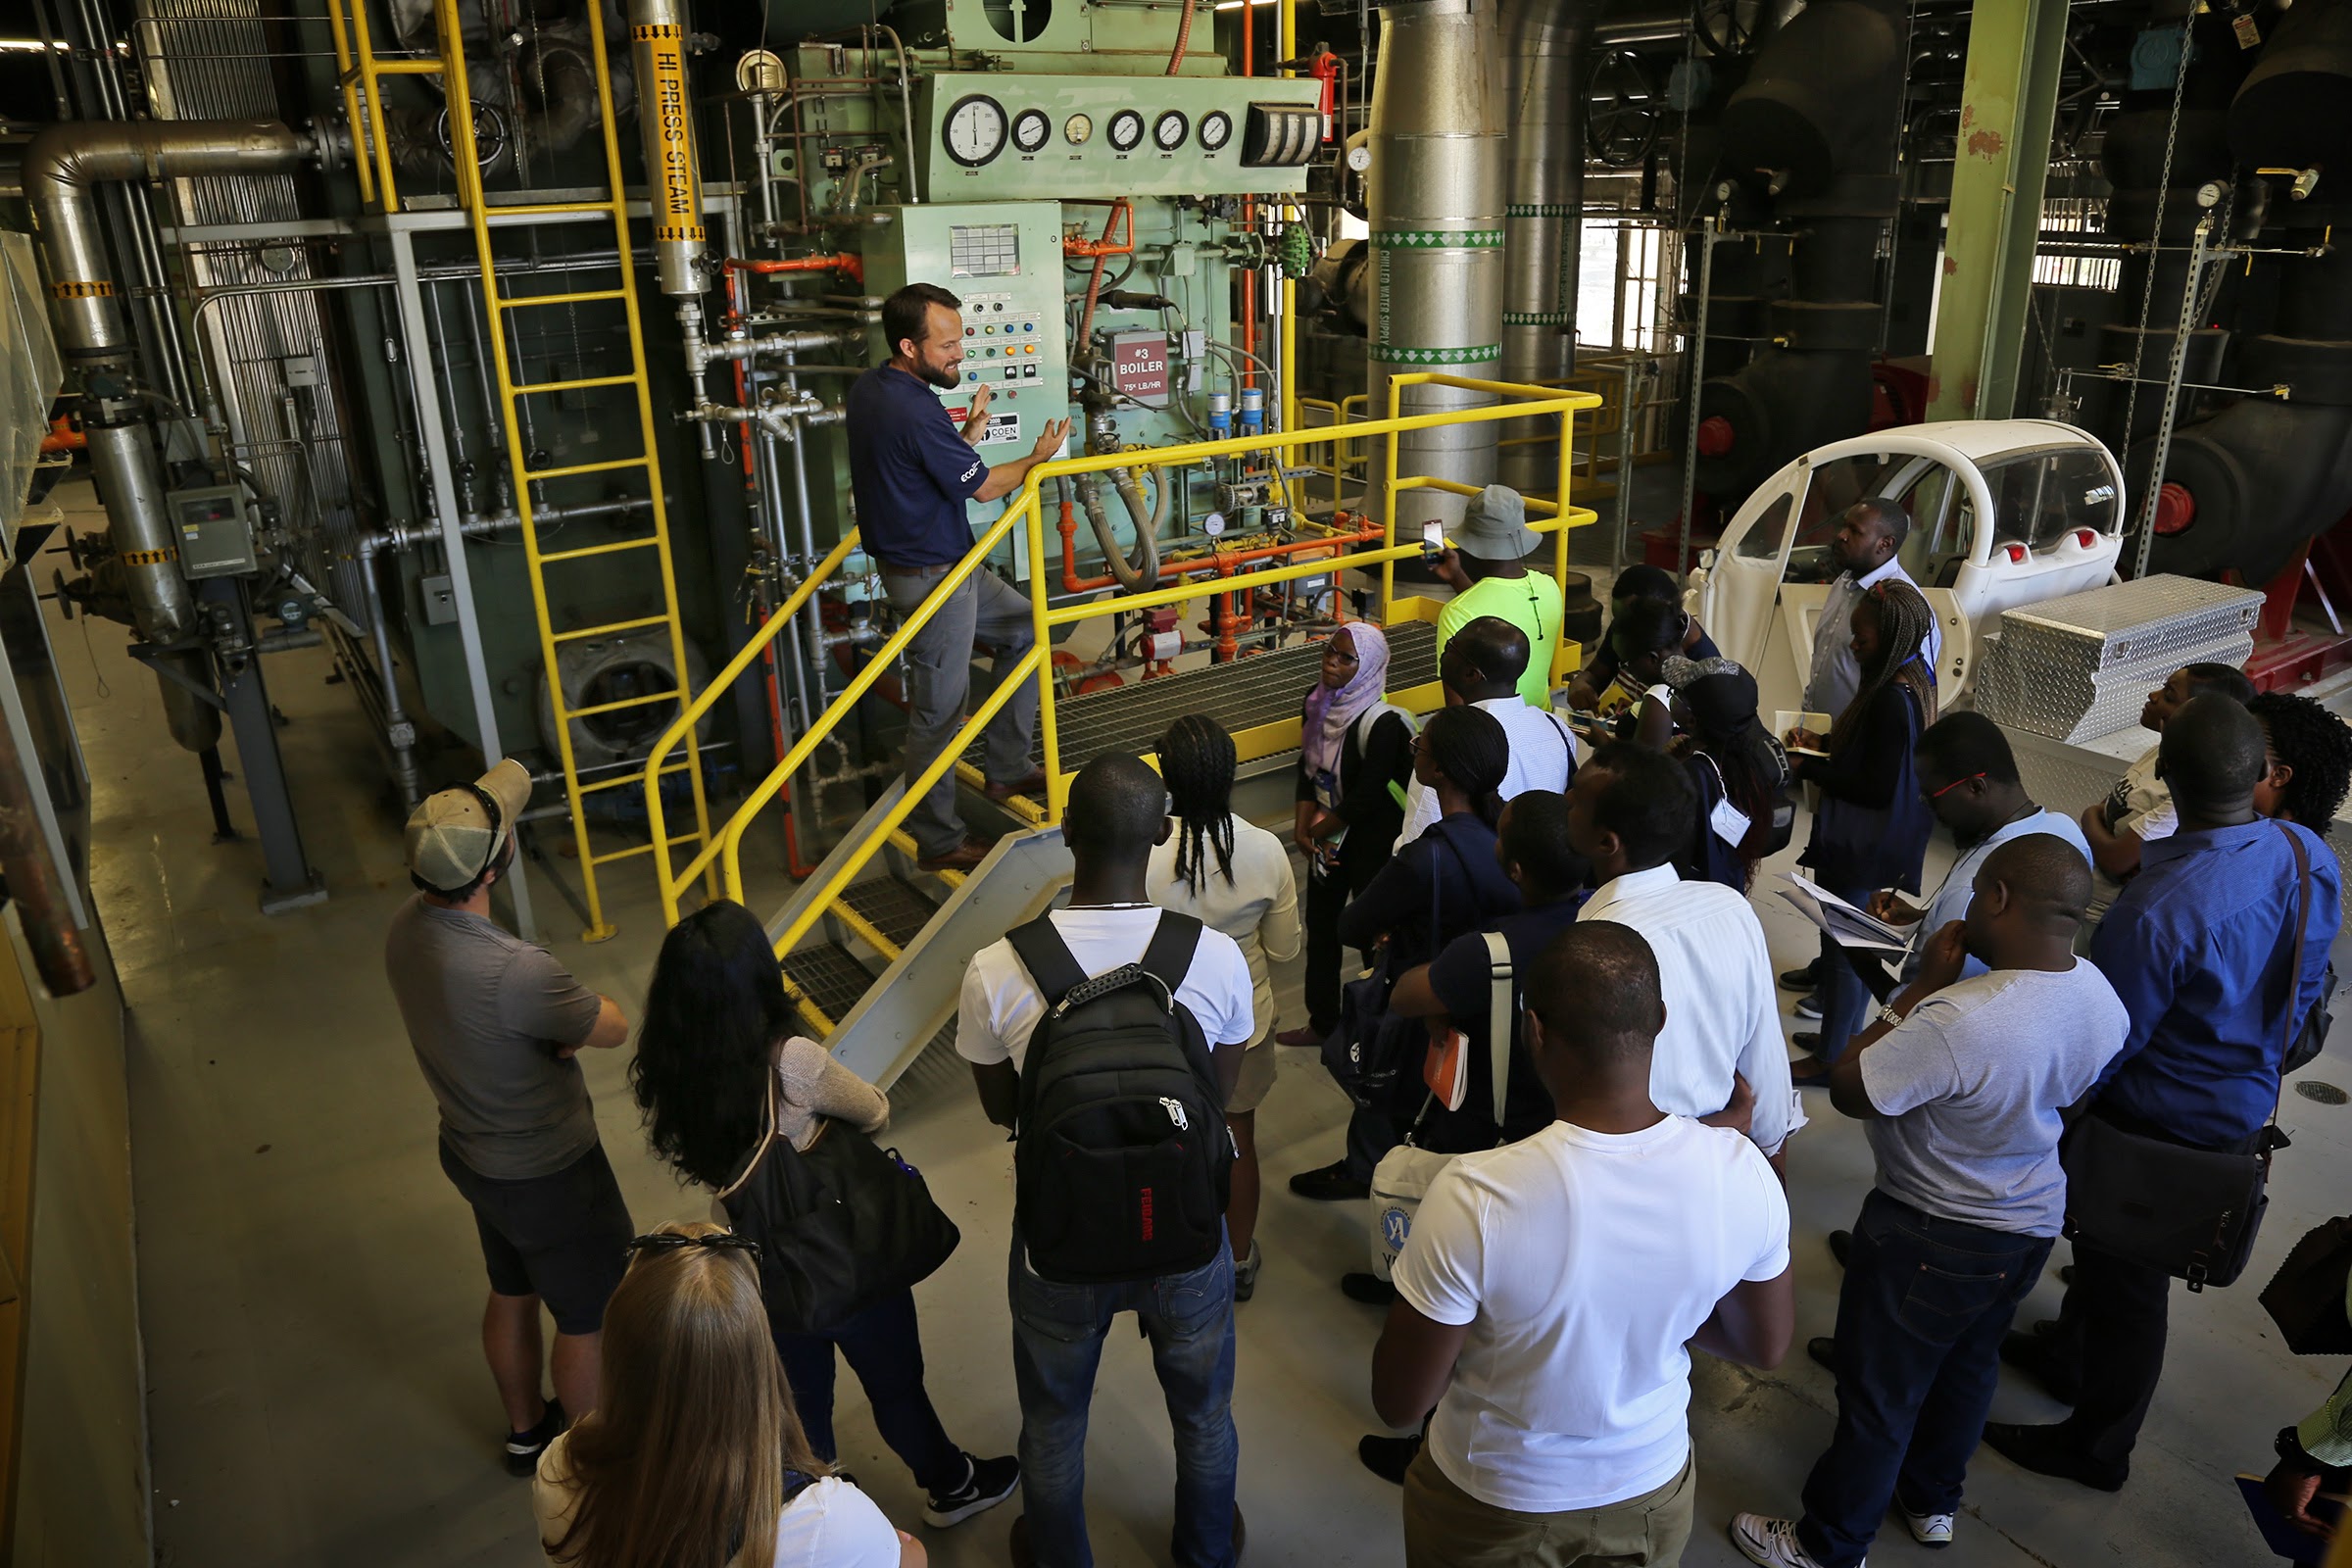 Joshua Morejohn, executive director of Engineering and Utilities Operations, shows a boiler in the Central Heating and Cooling Plant to a facilities tour group. Boilers, which rely on fossil fuels to create steam, will be replaced with infrastructure that utilizes renewable heat sources through the Big Shift.